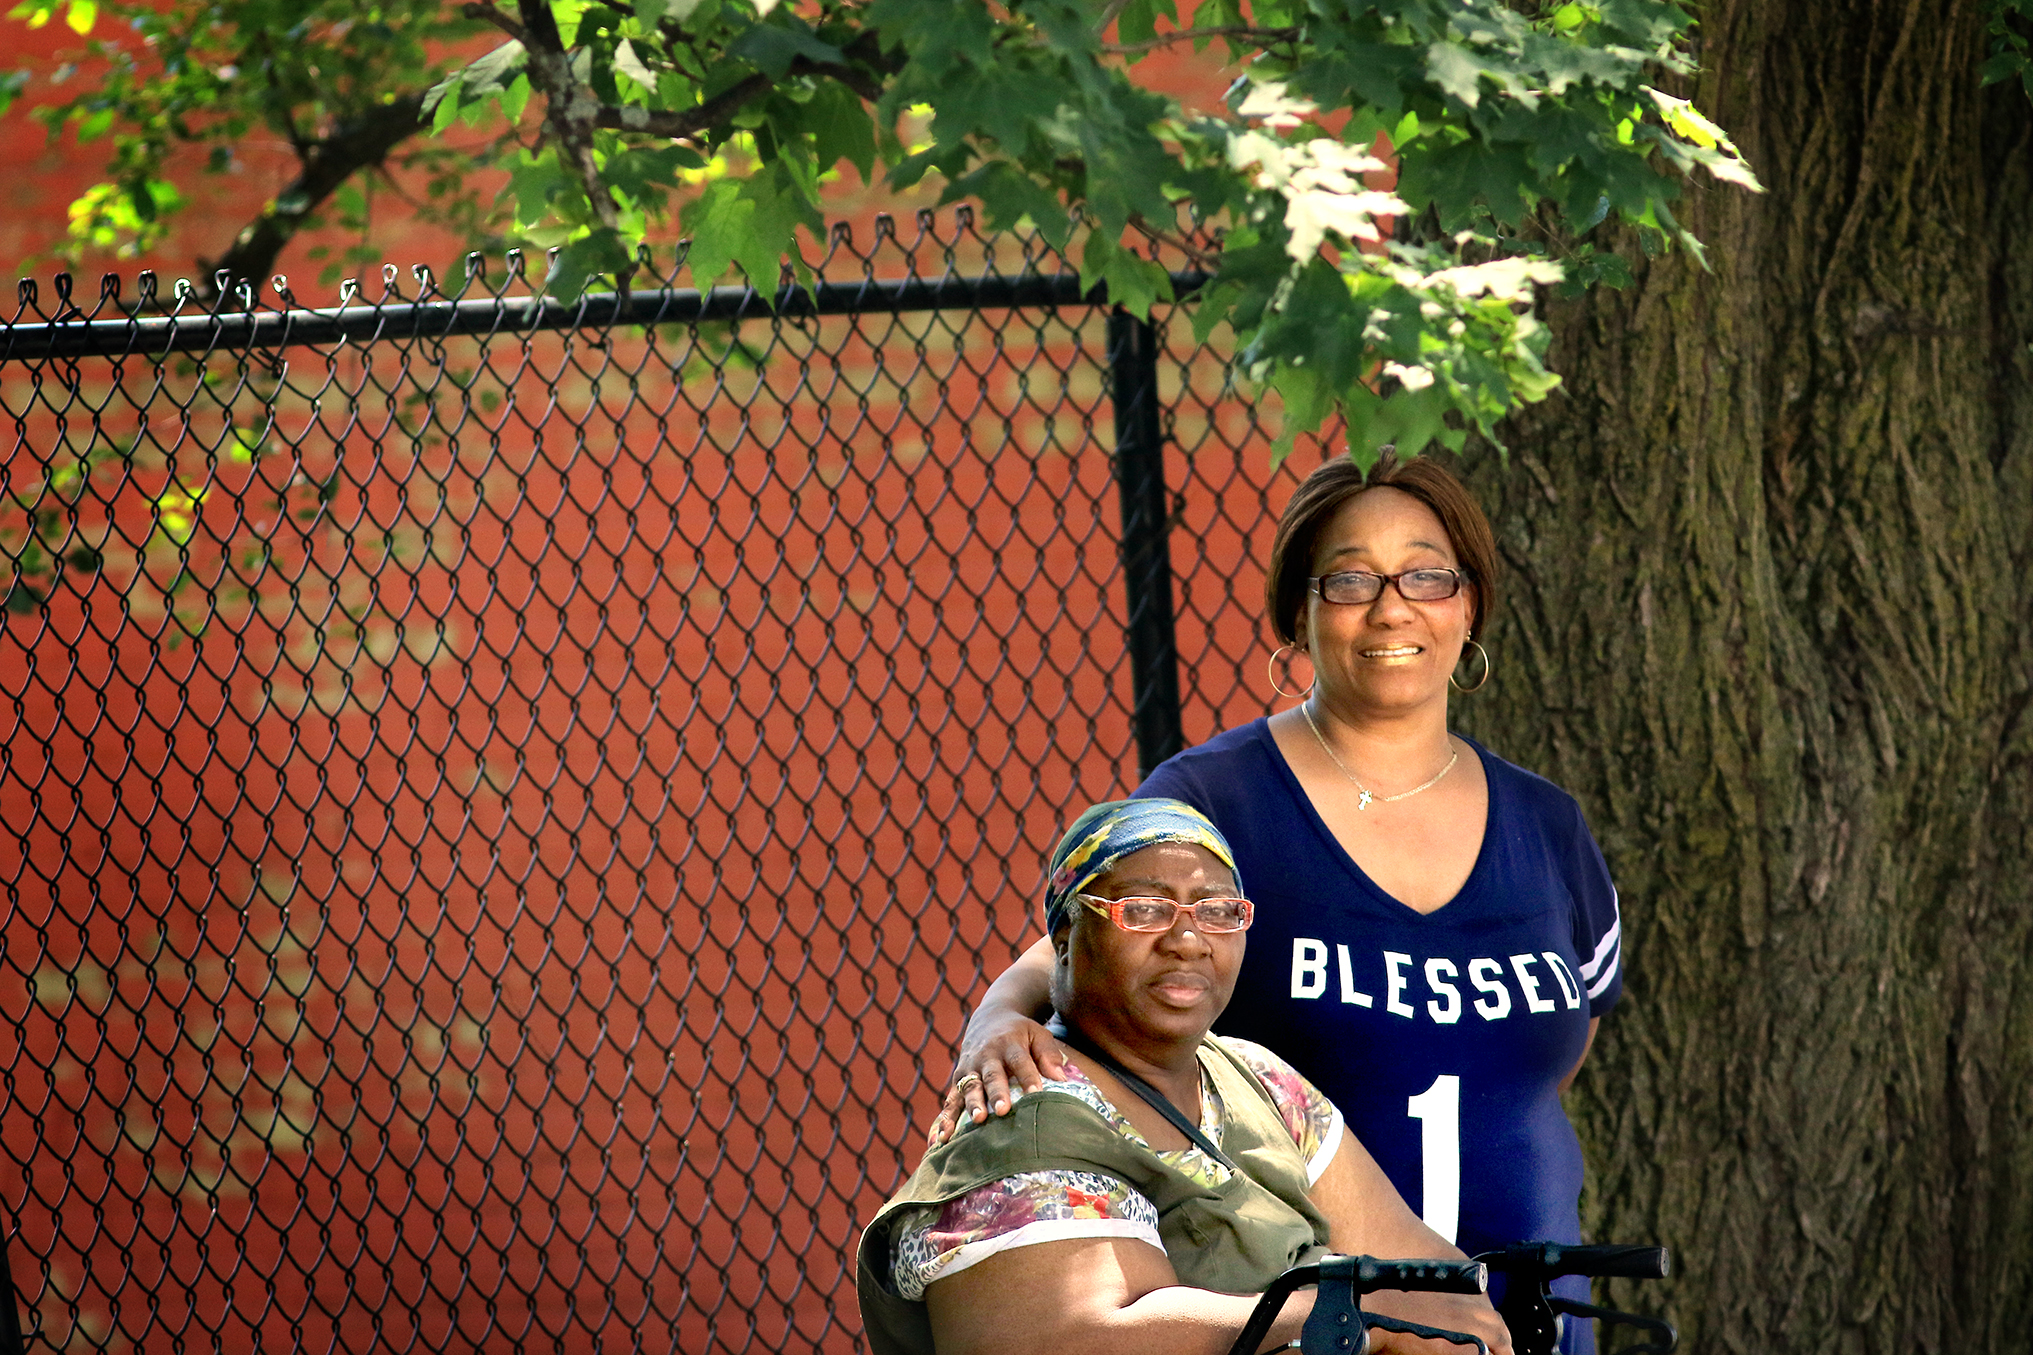 Glenda Gaines (right) and her friend Orlena McQueen are working to connect residents in their Dorchester neighborhood. Gaines ran a day care center in her home until COVID-19 forced her to shut it down.